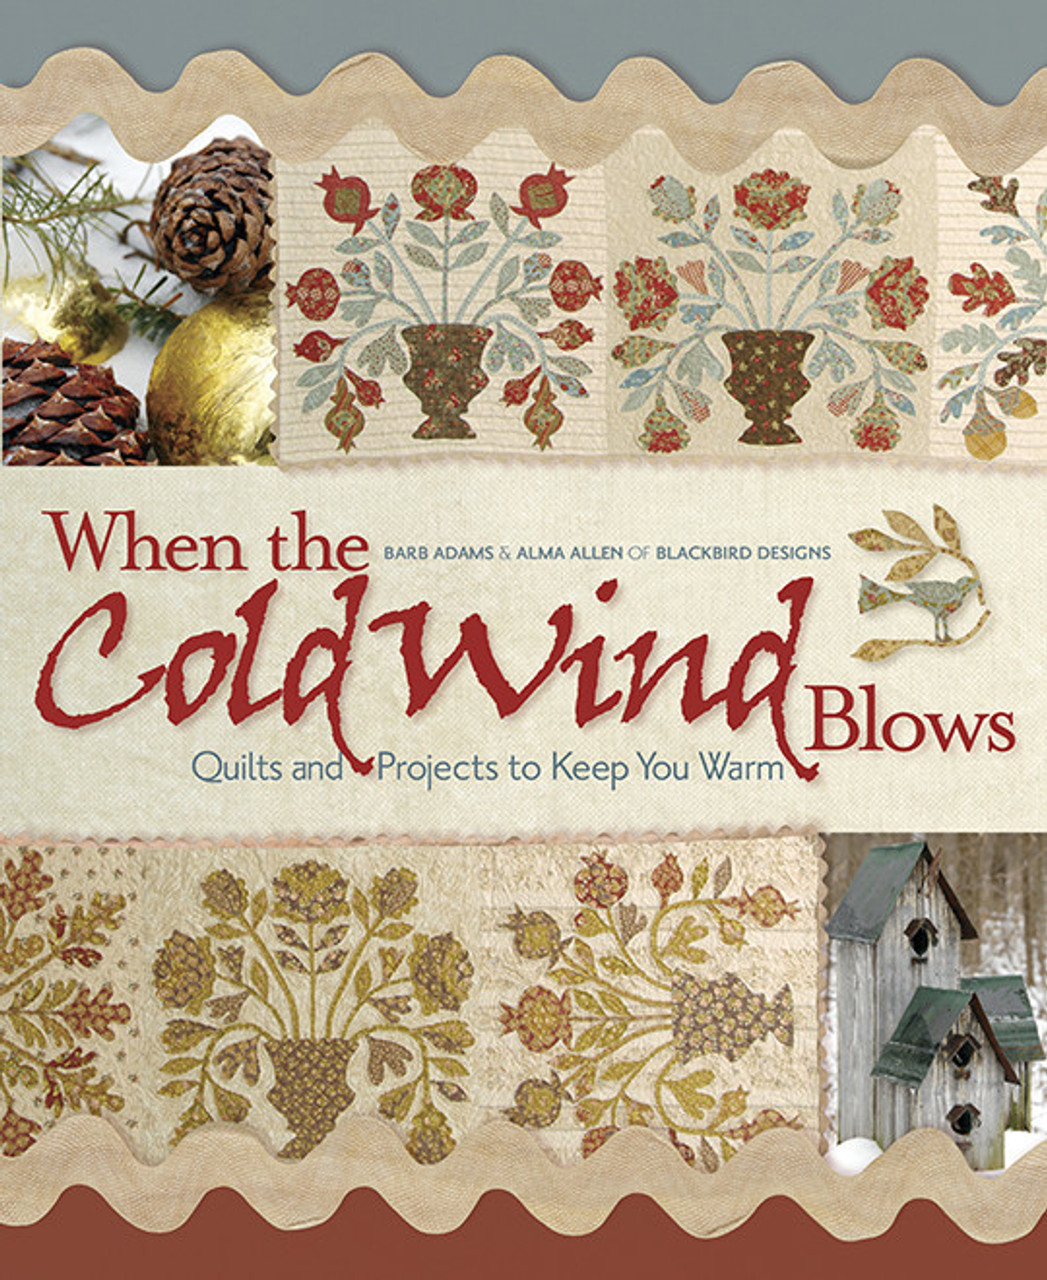 A Winter Quilt Pattern: Cold Front is Here